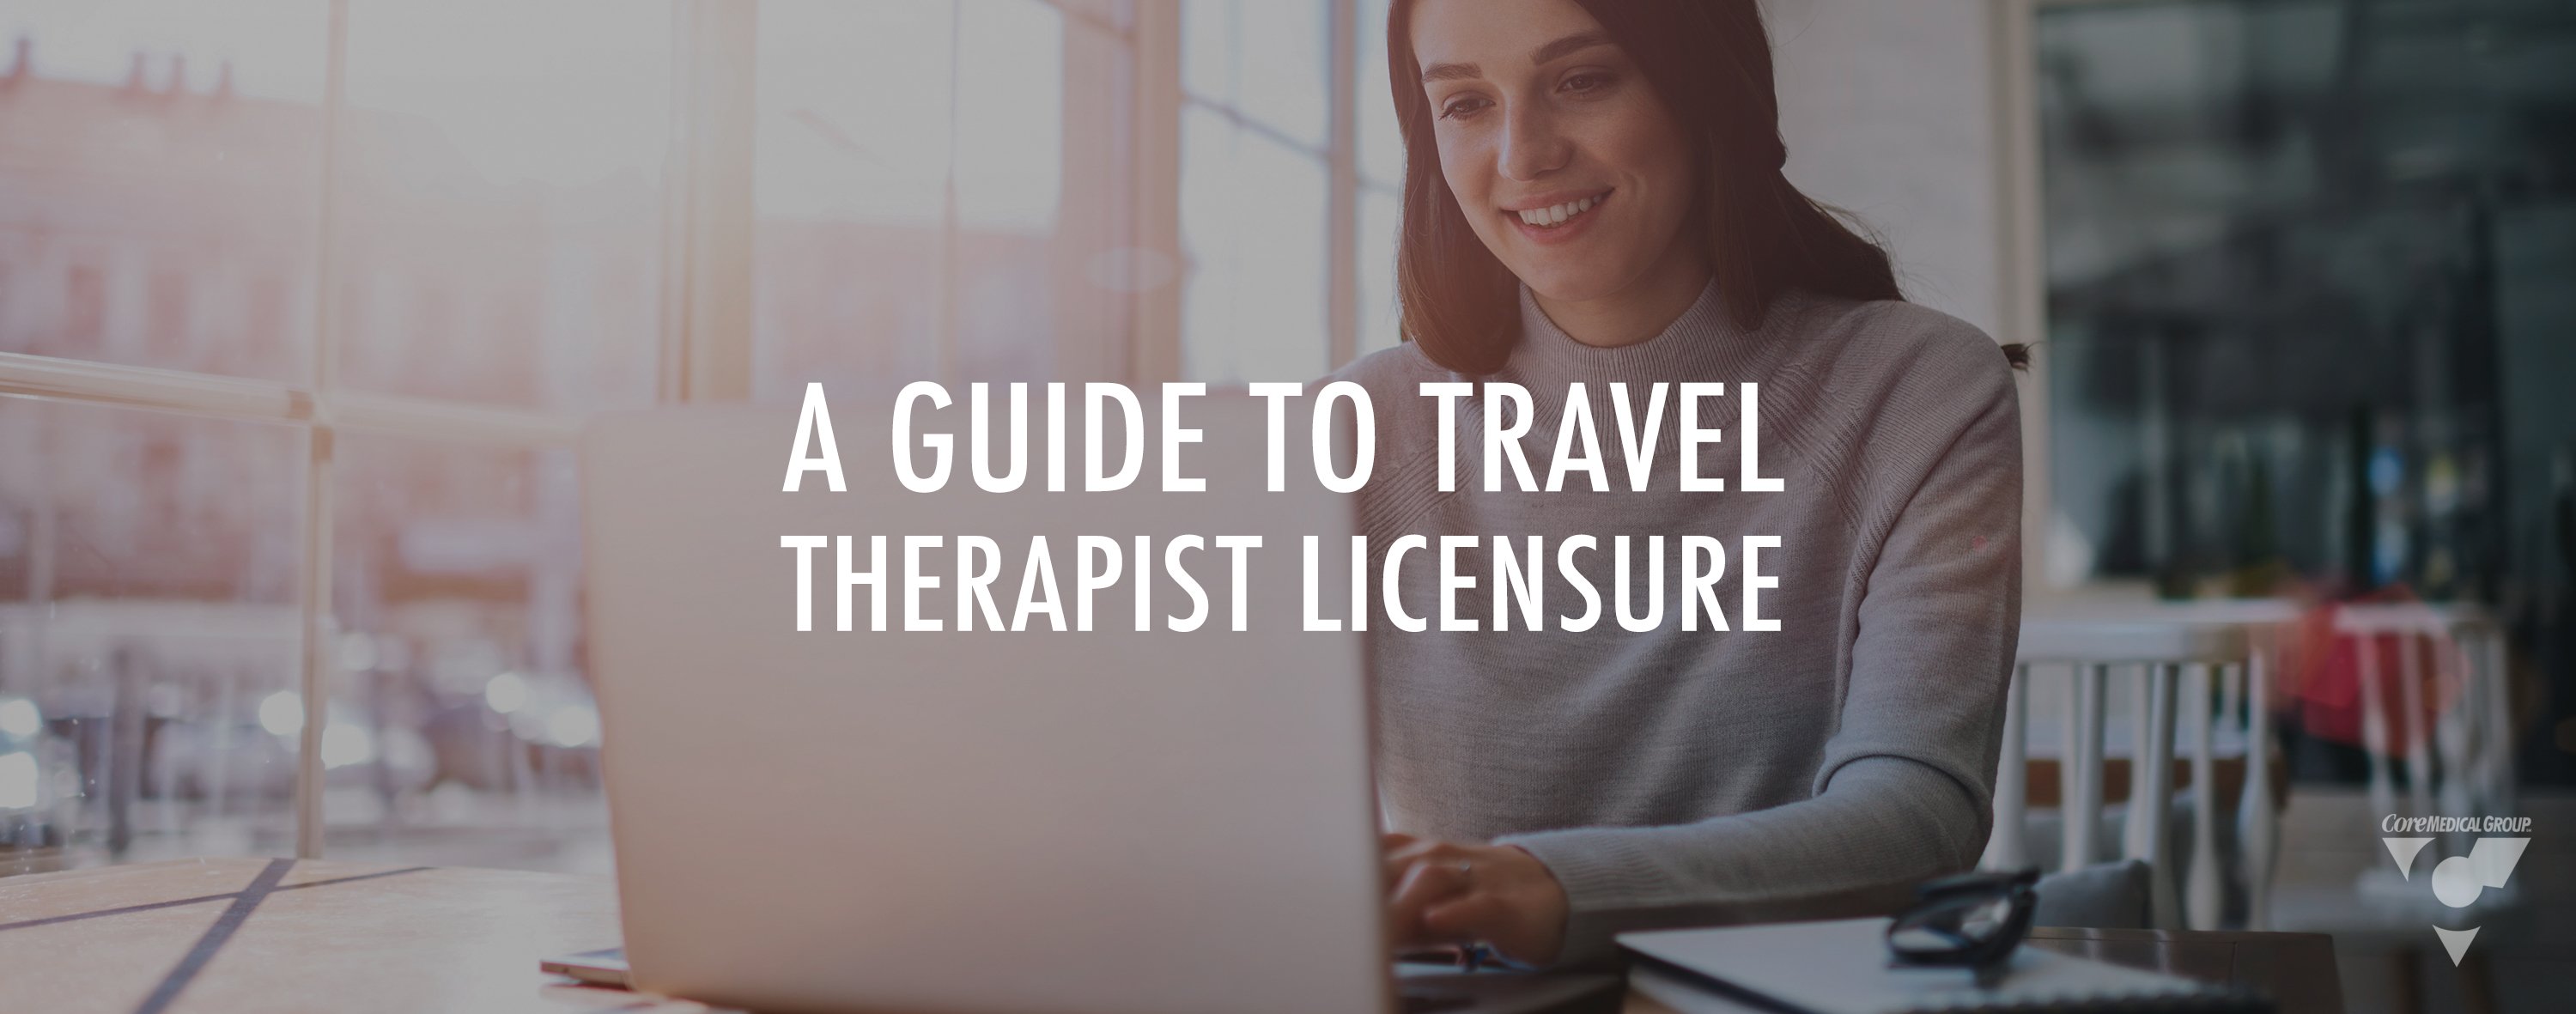 A Guide to Travel Therapist Licensure